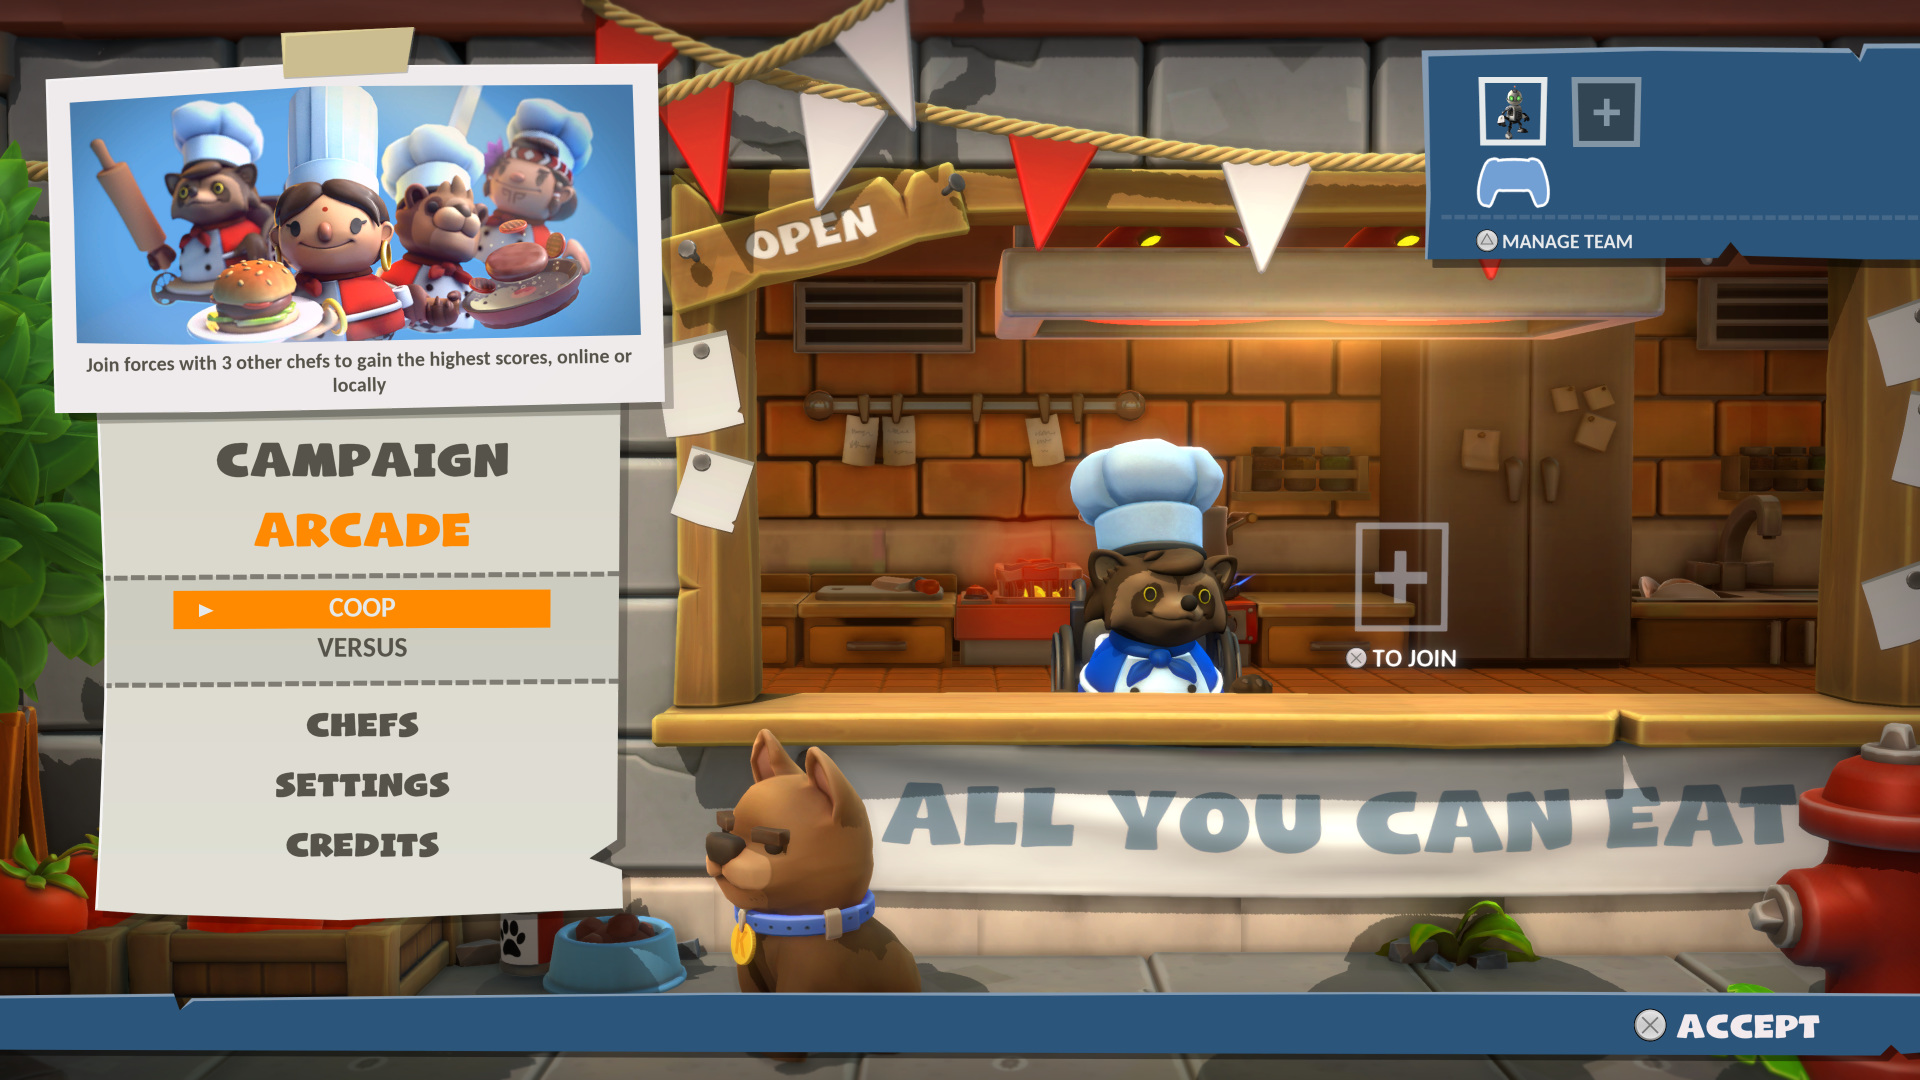 Overcooked! All You Can Eat [Online Game Code] 